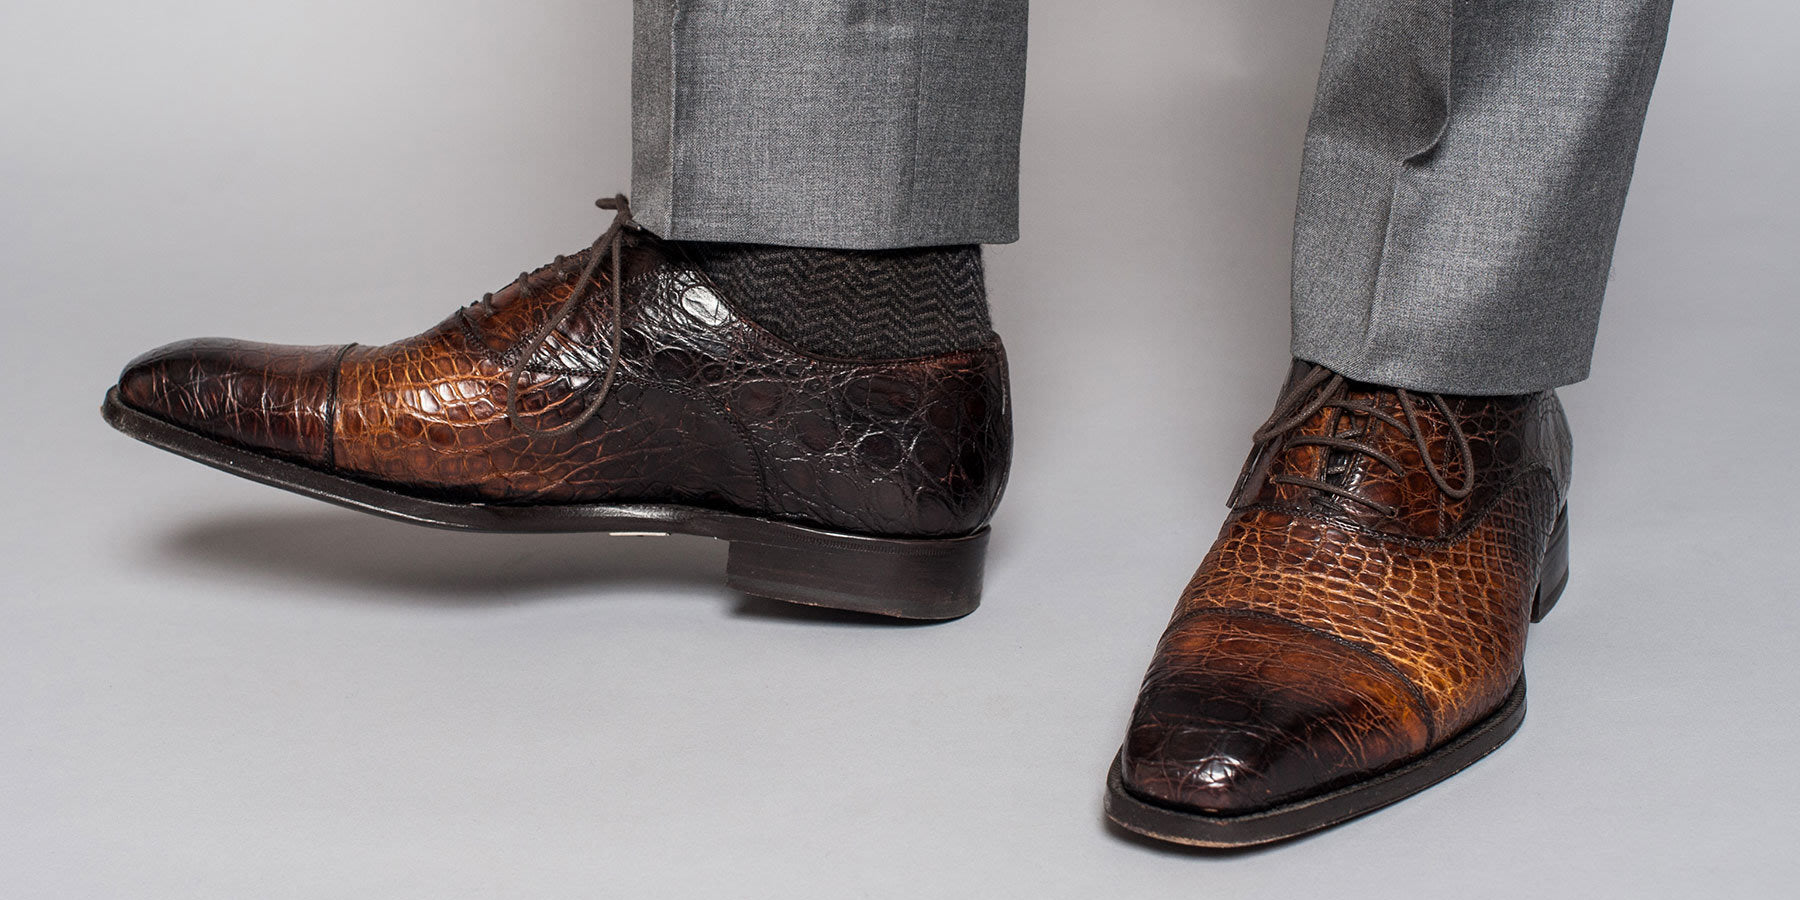 How to find men's dress shoes that will last for decades